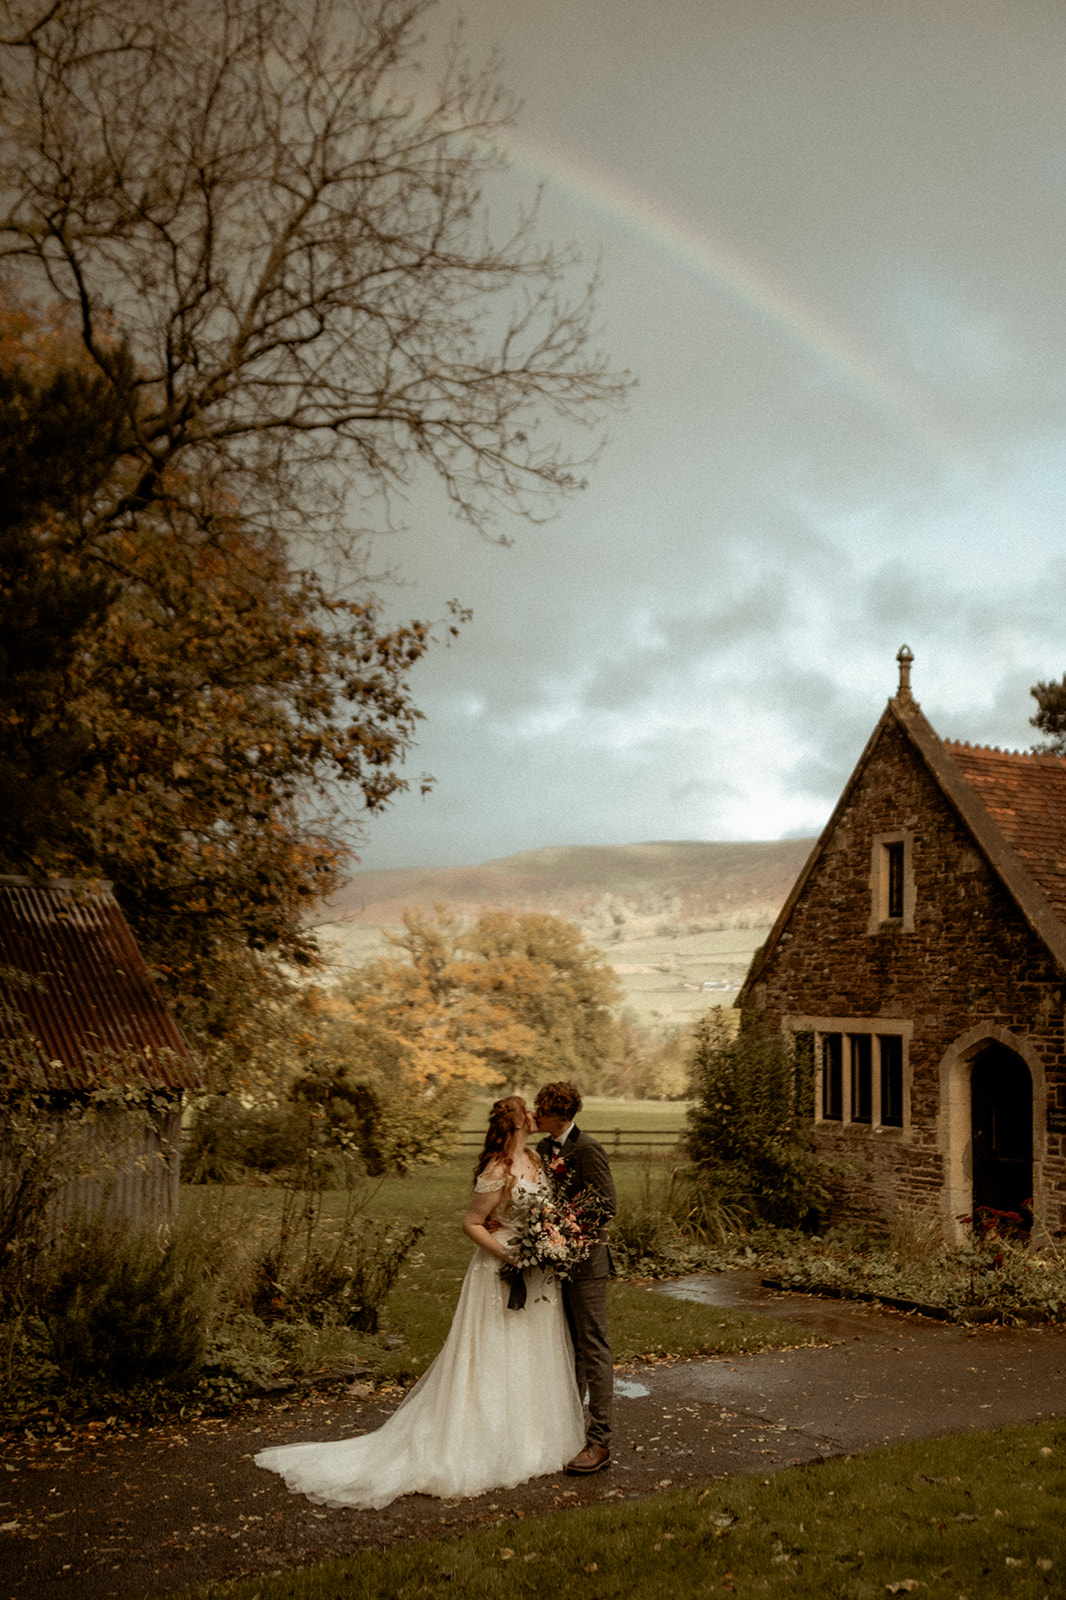 A couple on their wedding day at the Grade 1 listed Treberfydd House.